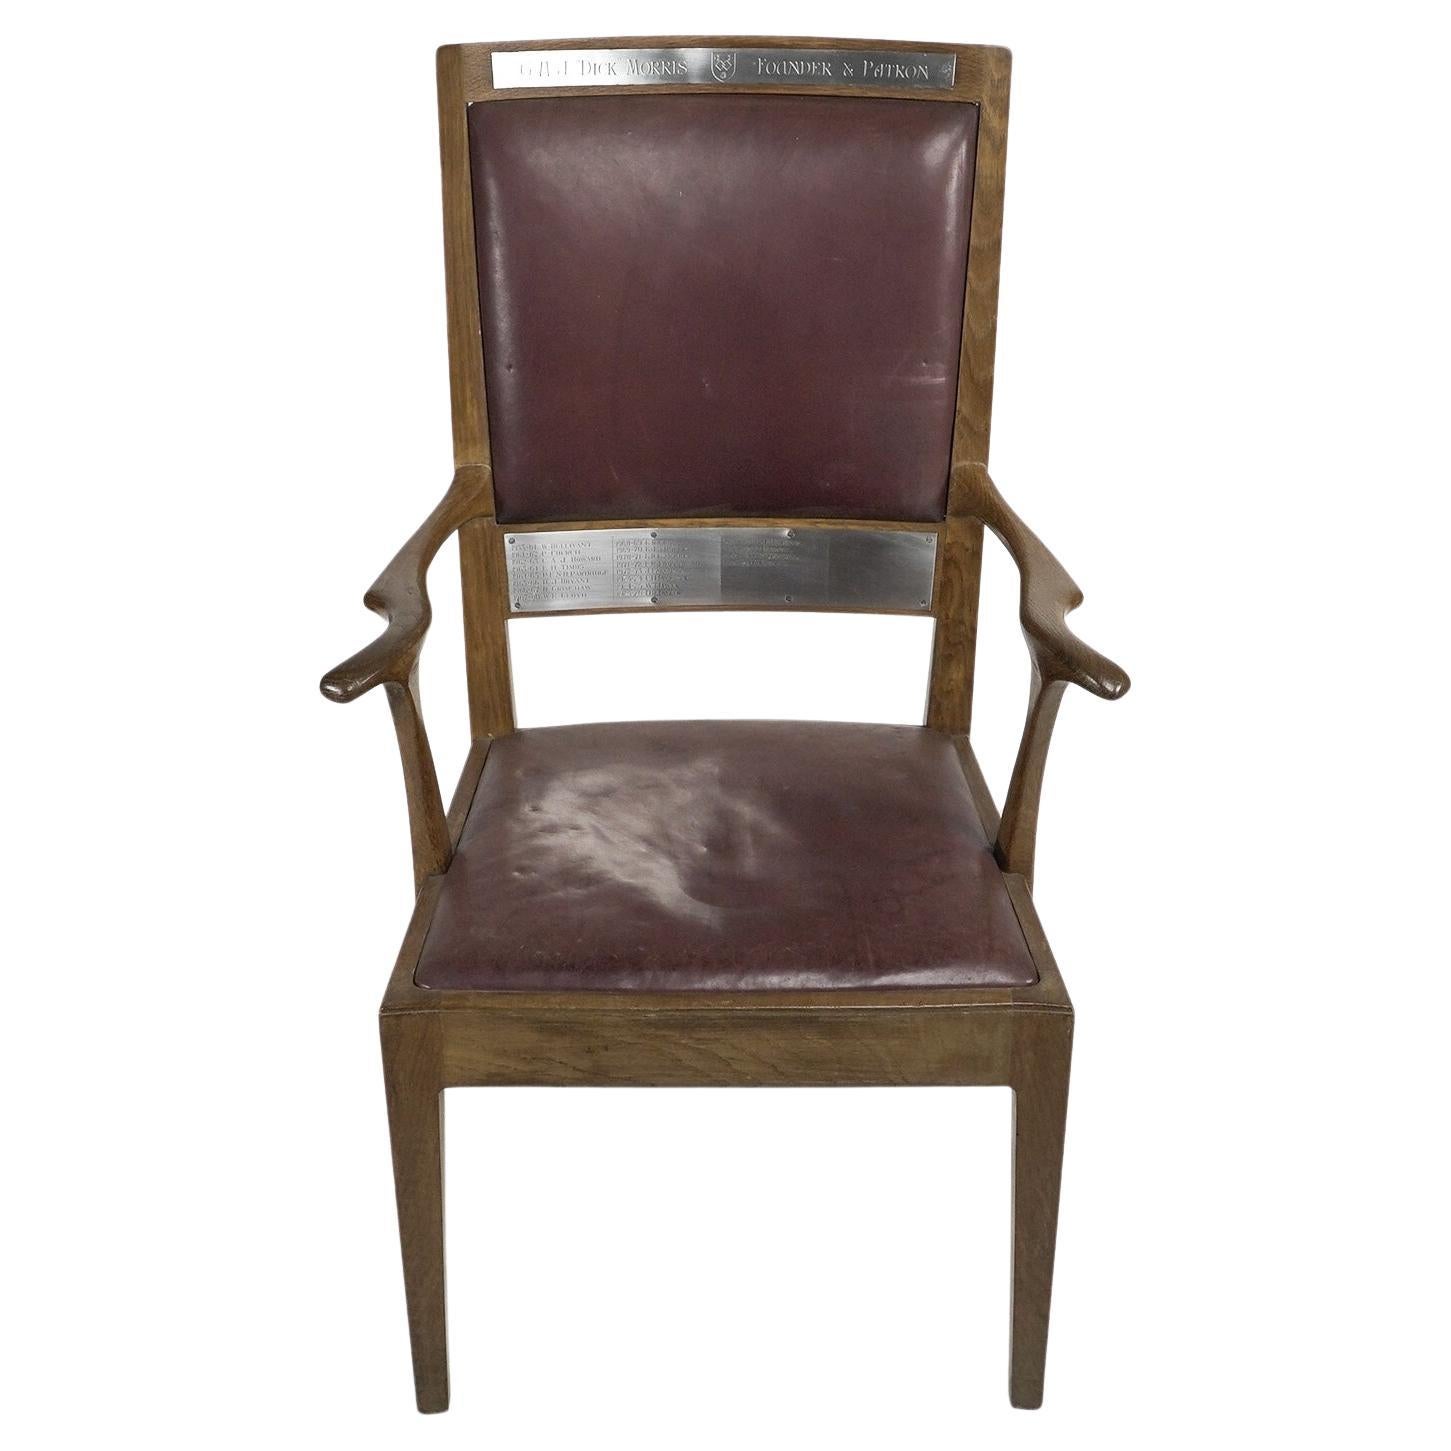 Edward Barnsley. Commissioned by G H J Morris An Arts and Crafts armchair with beautifully made organic curvaceous sculptured arms, he certainly put a lot of love and thought into them. Having an inscribed inset plaque: G H J 